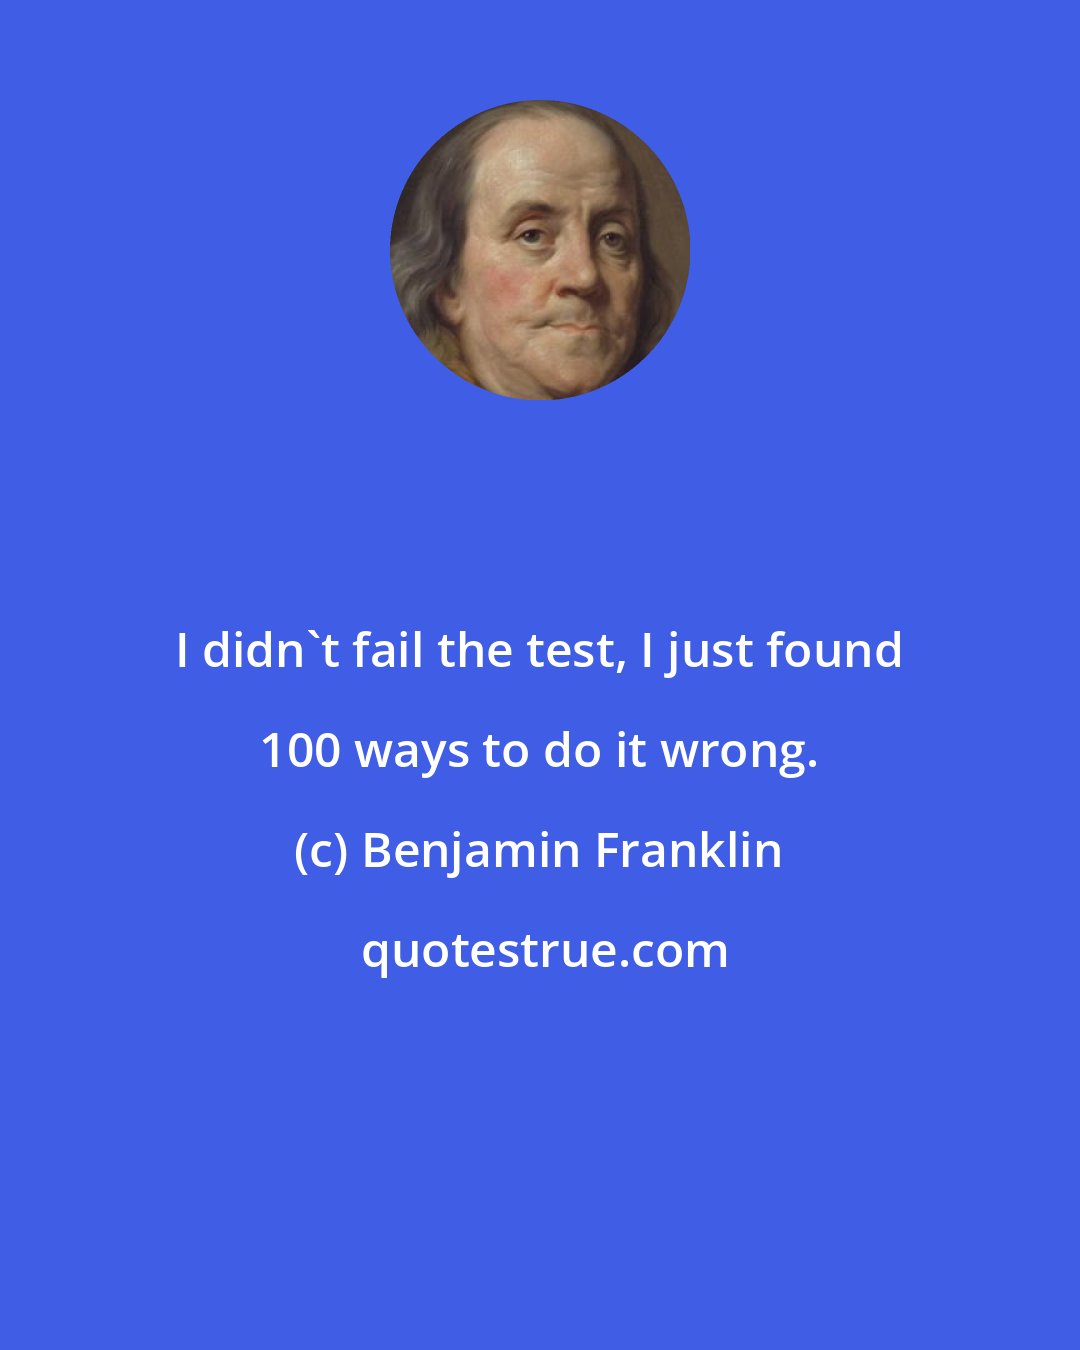 Benjamin Franklin: I didn't fail the test, I just found 100 ways to do it wrong.